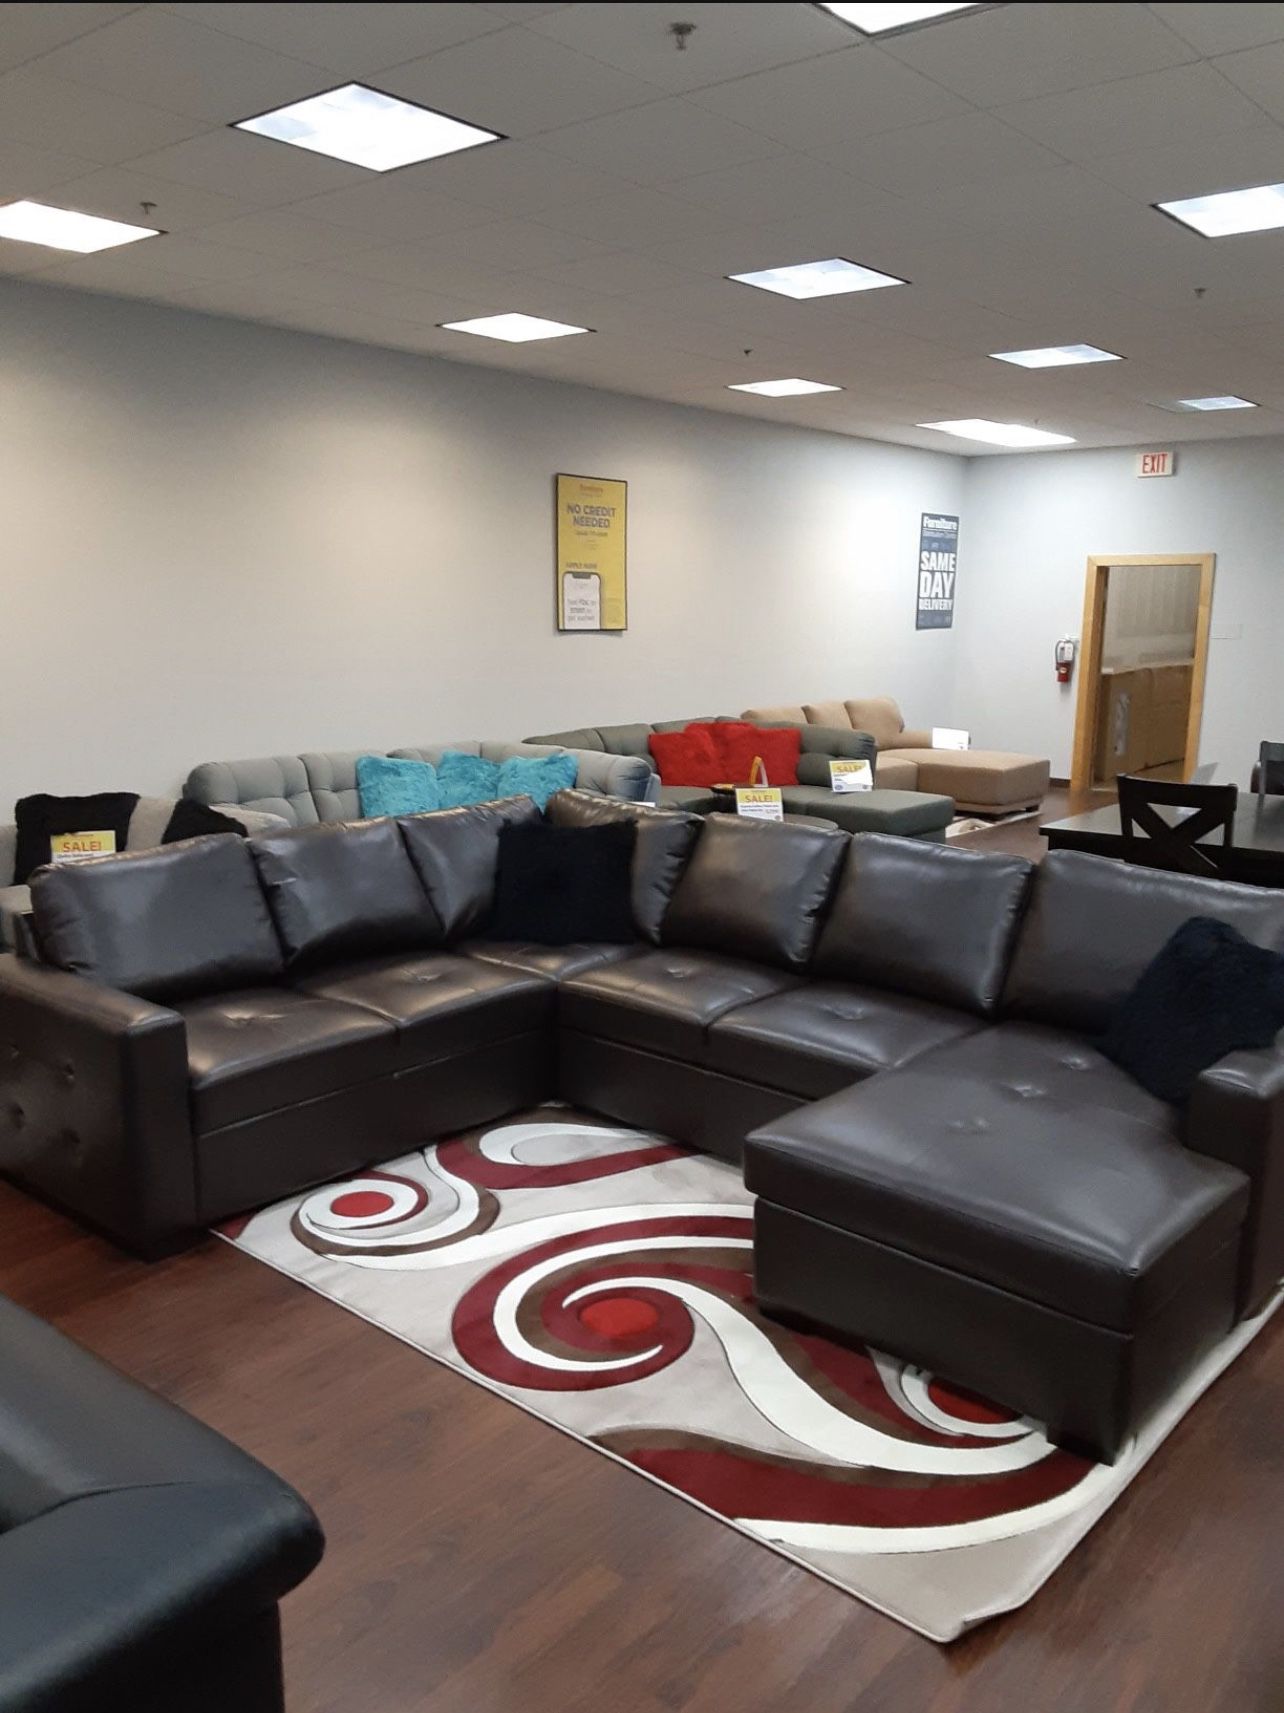 COMFY NEW MONTEREY BROWN SECTIONAL SOFA WITH STORAGE CHAISE ON SALE ONLY $999. IN STOCK SAME DAY DELIVERY 